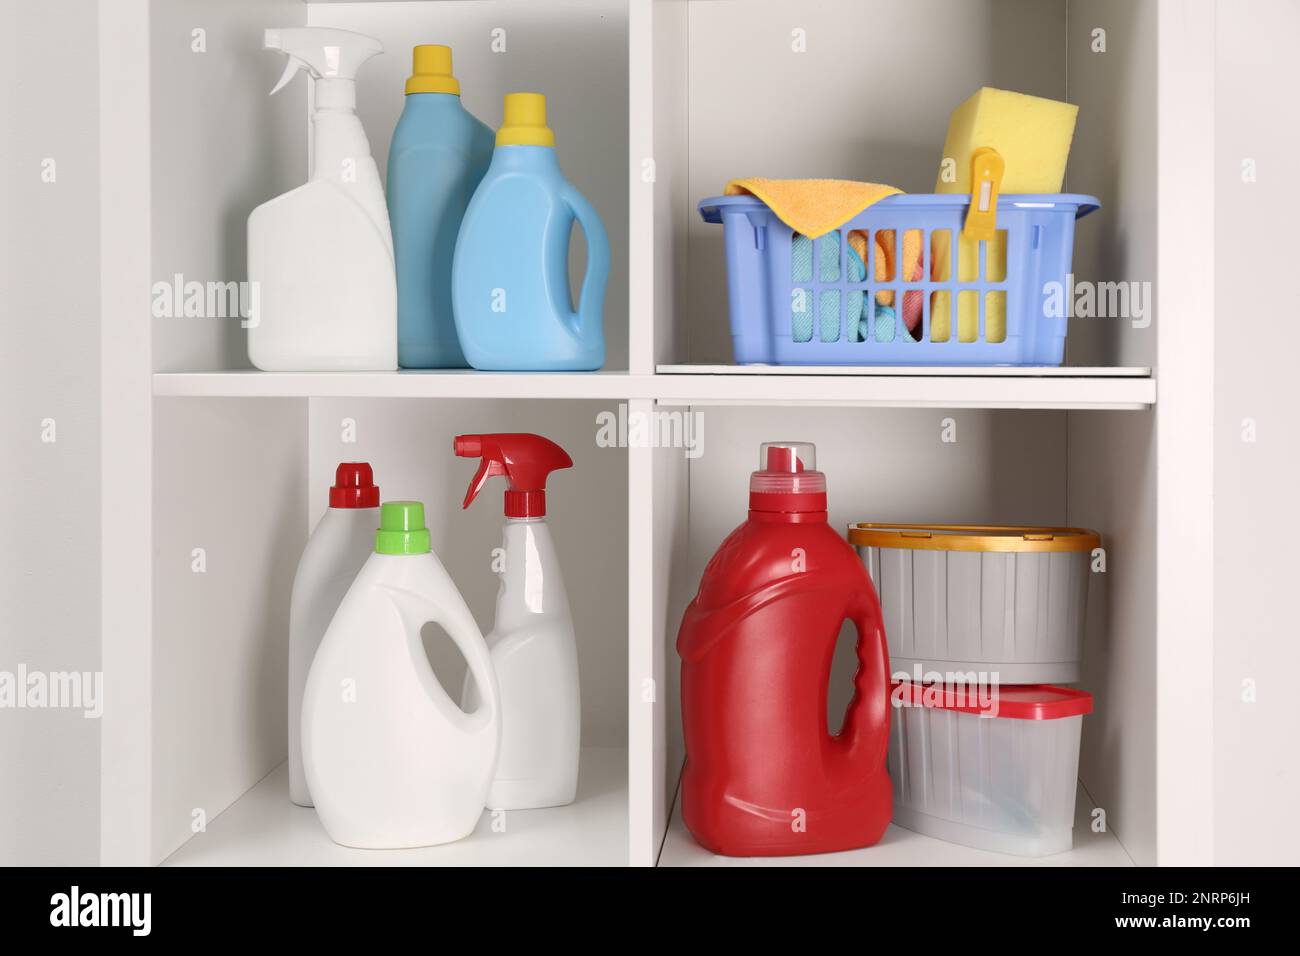 https://c8.alamy.com/comp/2NRP6JH/different-cleaning-supplies-and-tools-on-shelves-2NRP6JH.jpg